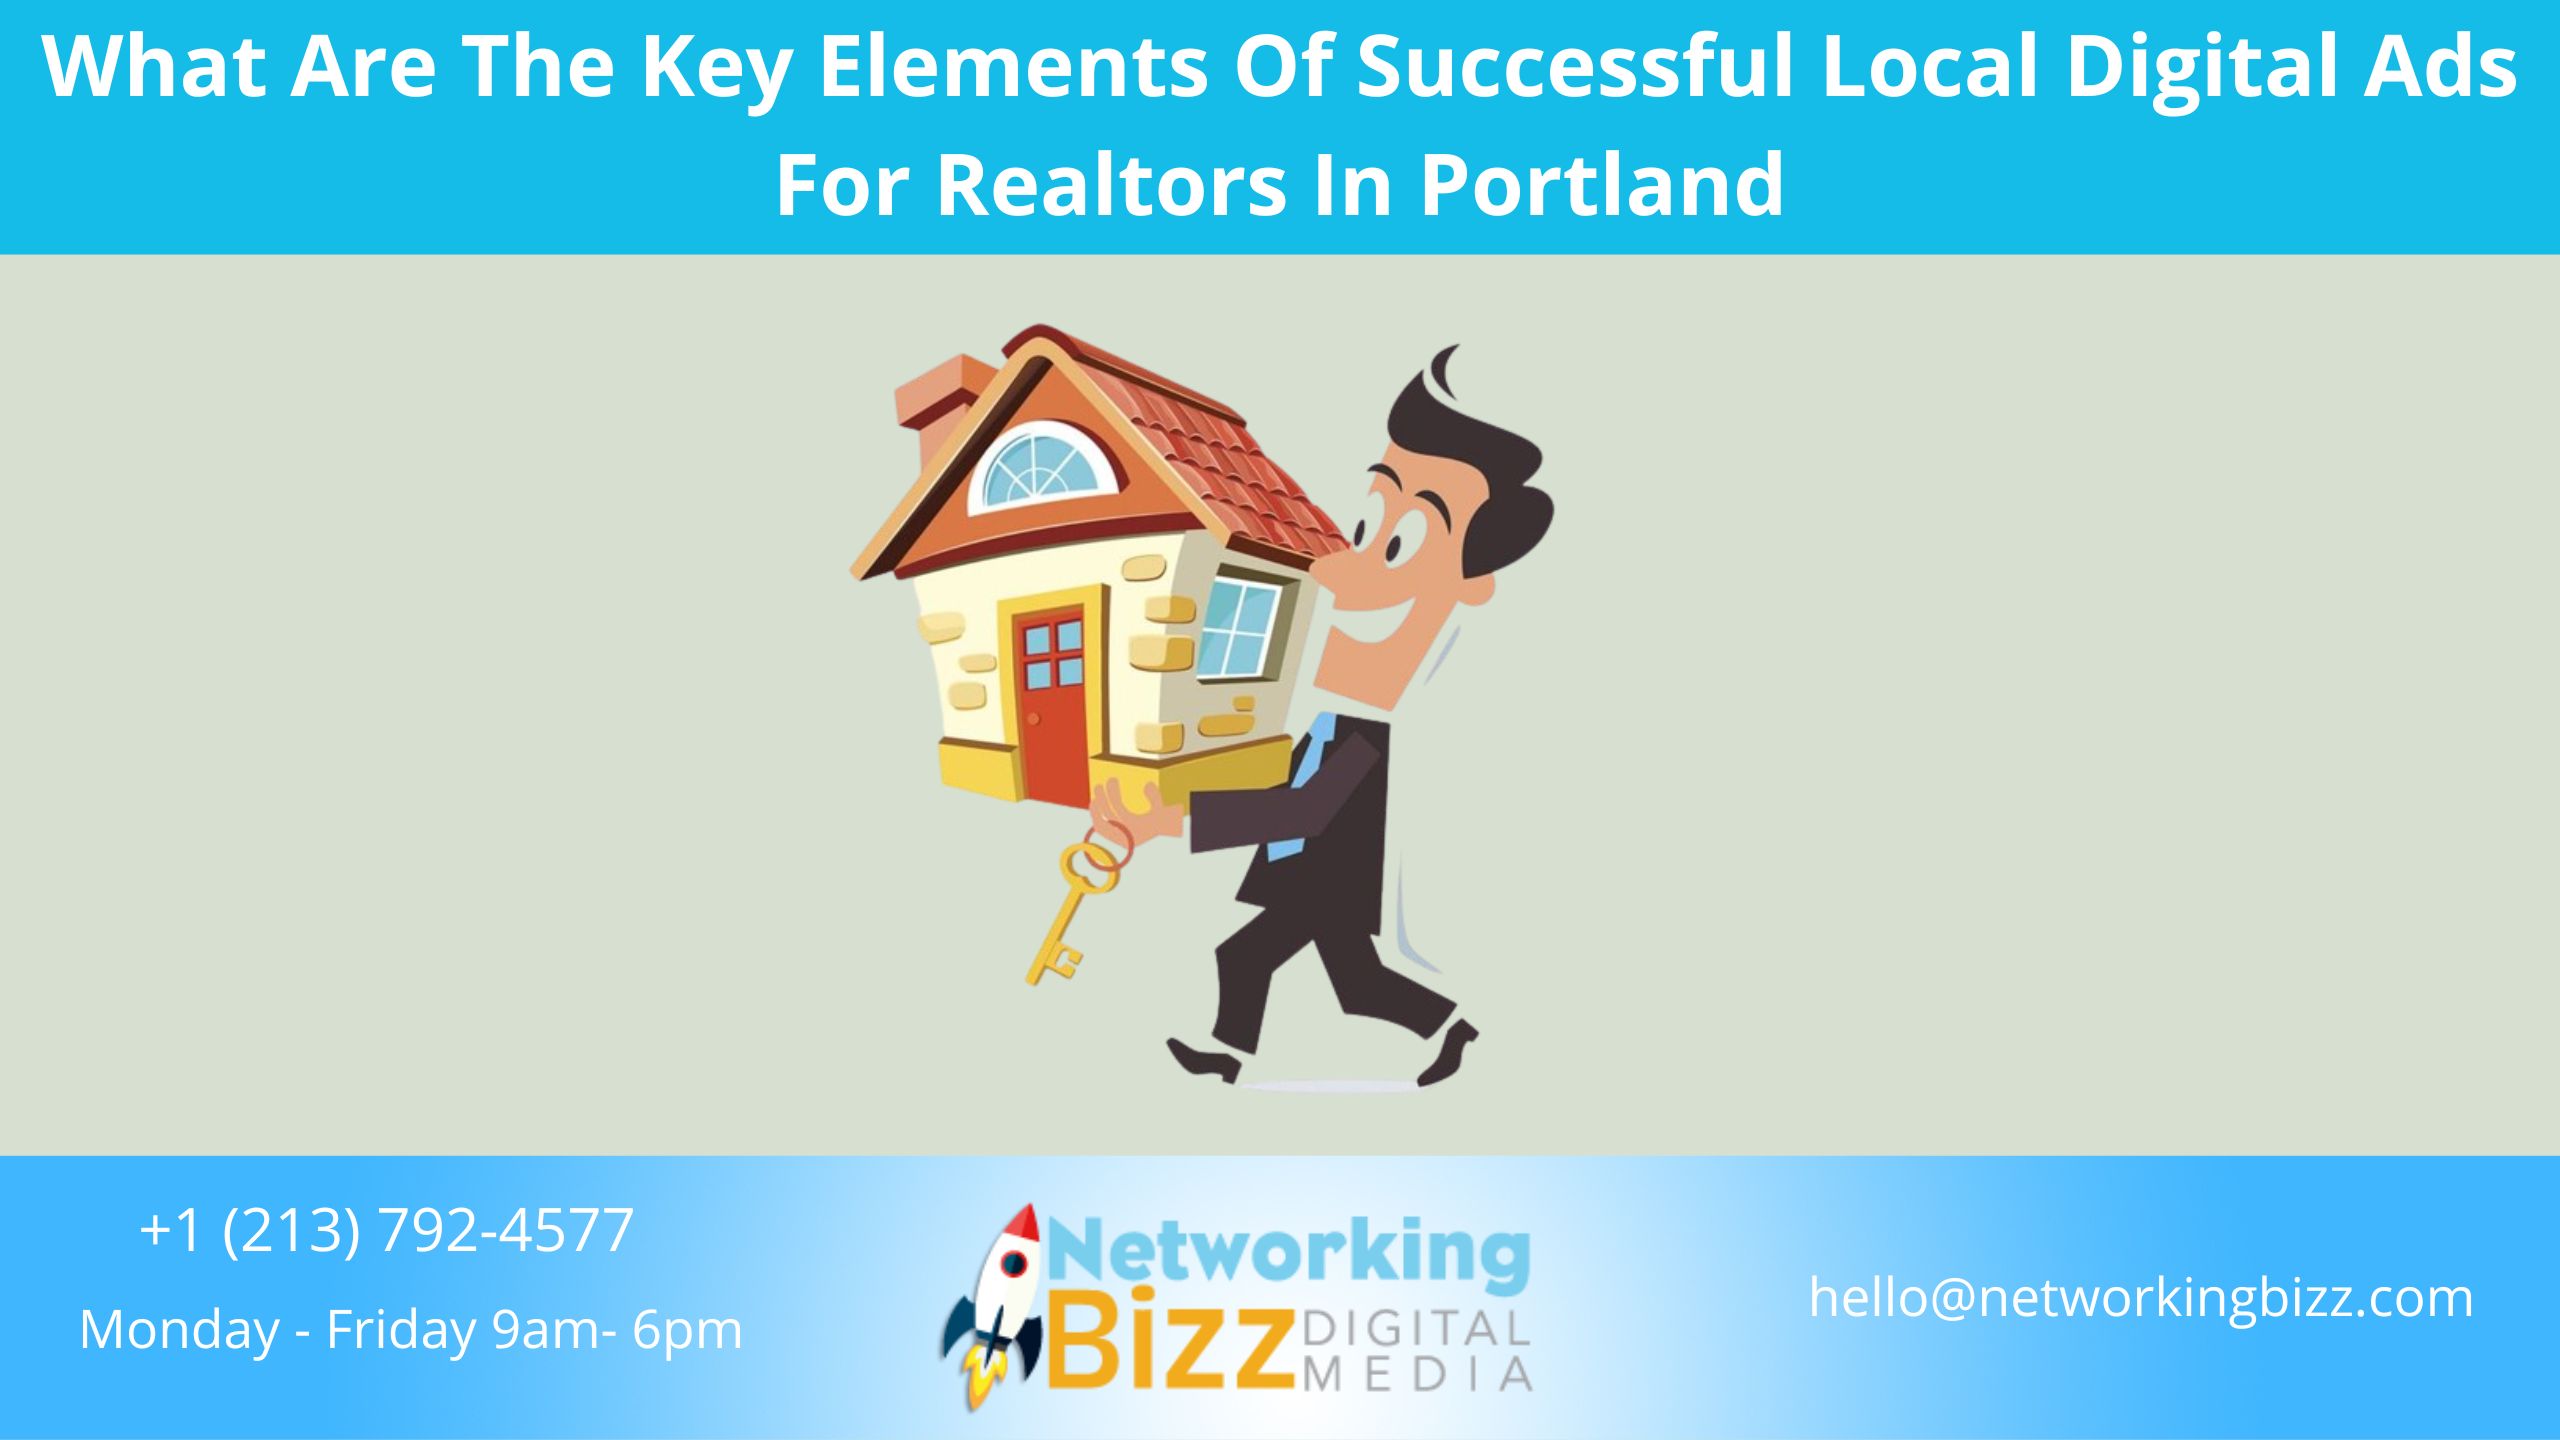 What Are The Key Elements Of Successful Local Digital Ads For Realtors In Portland